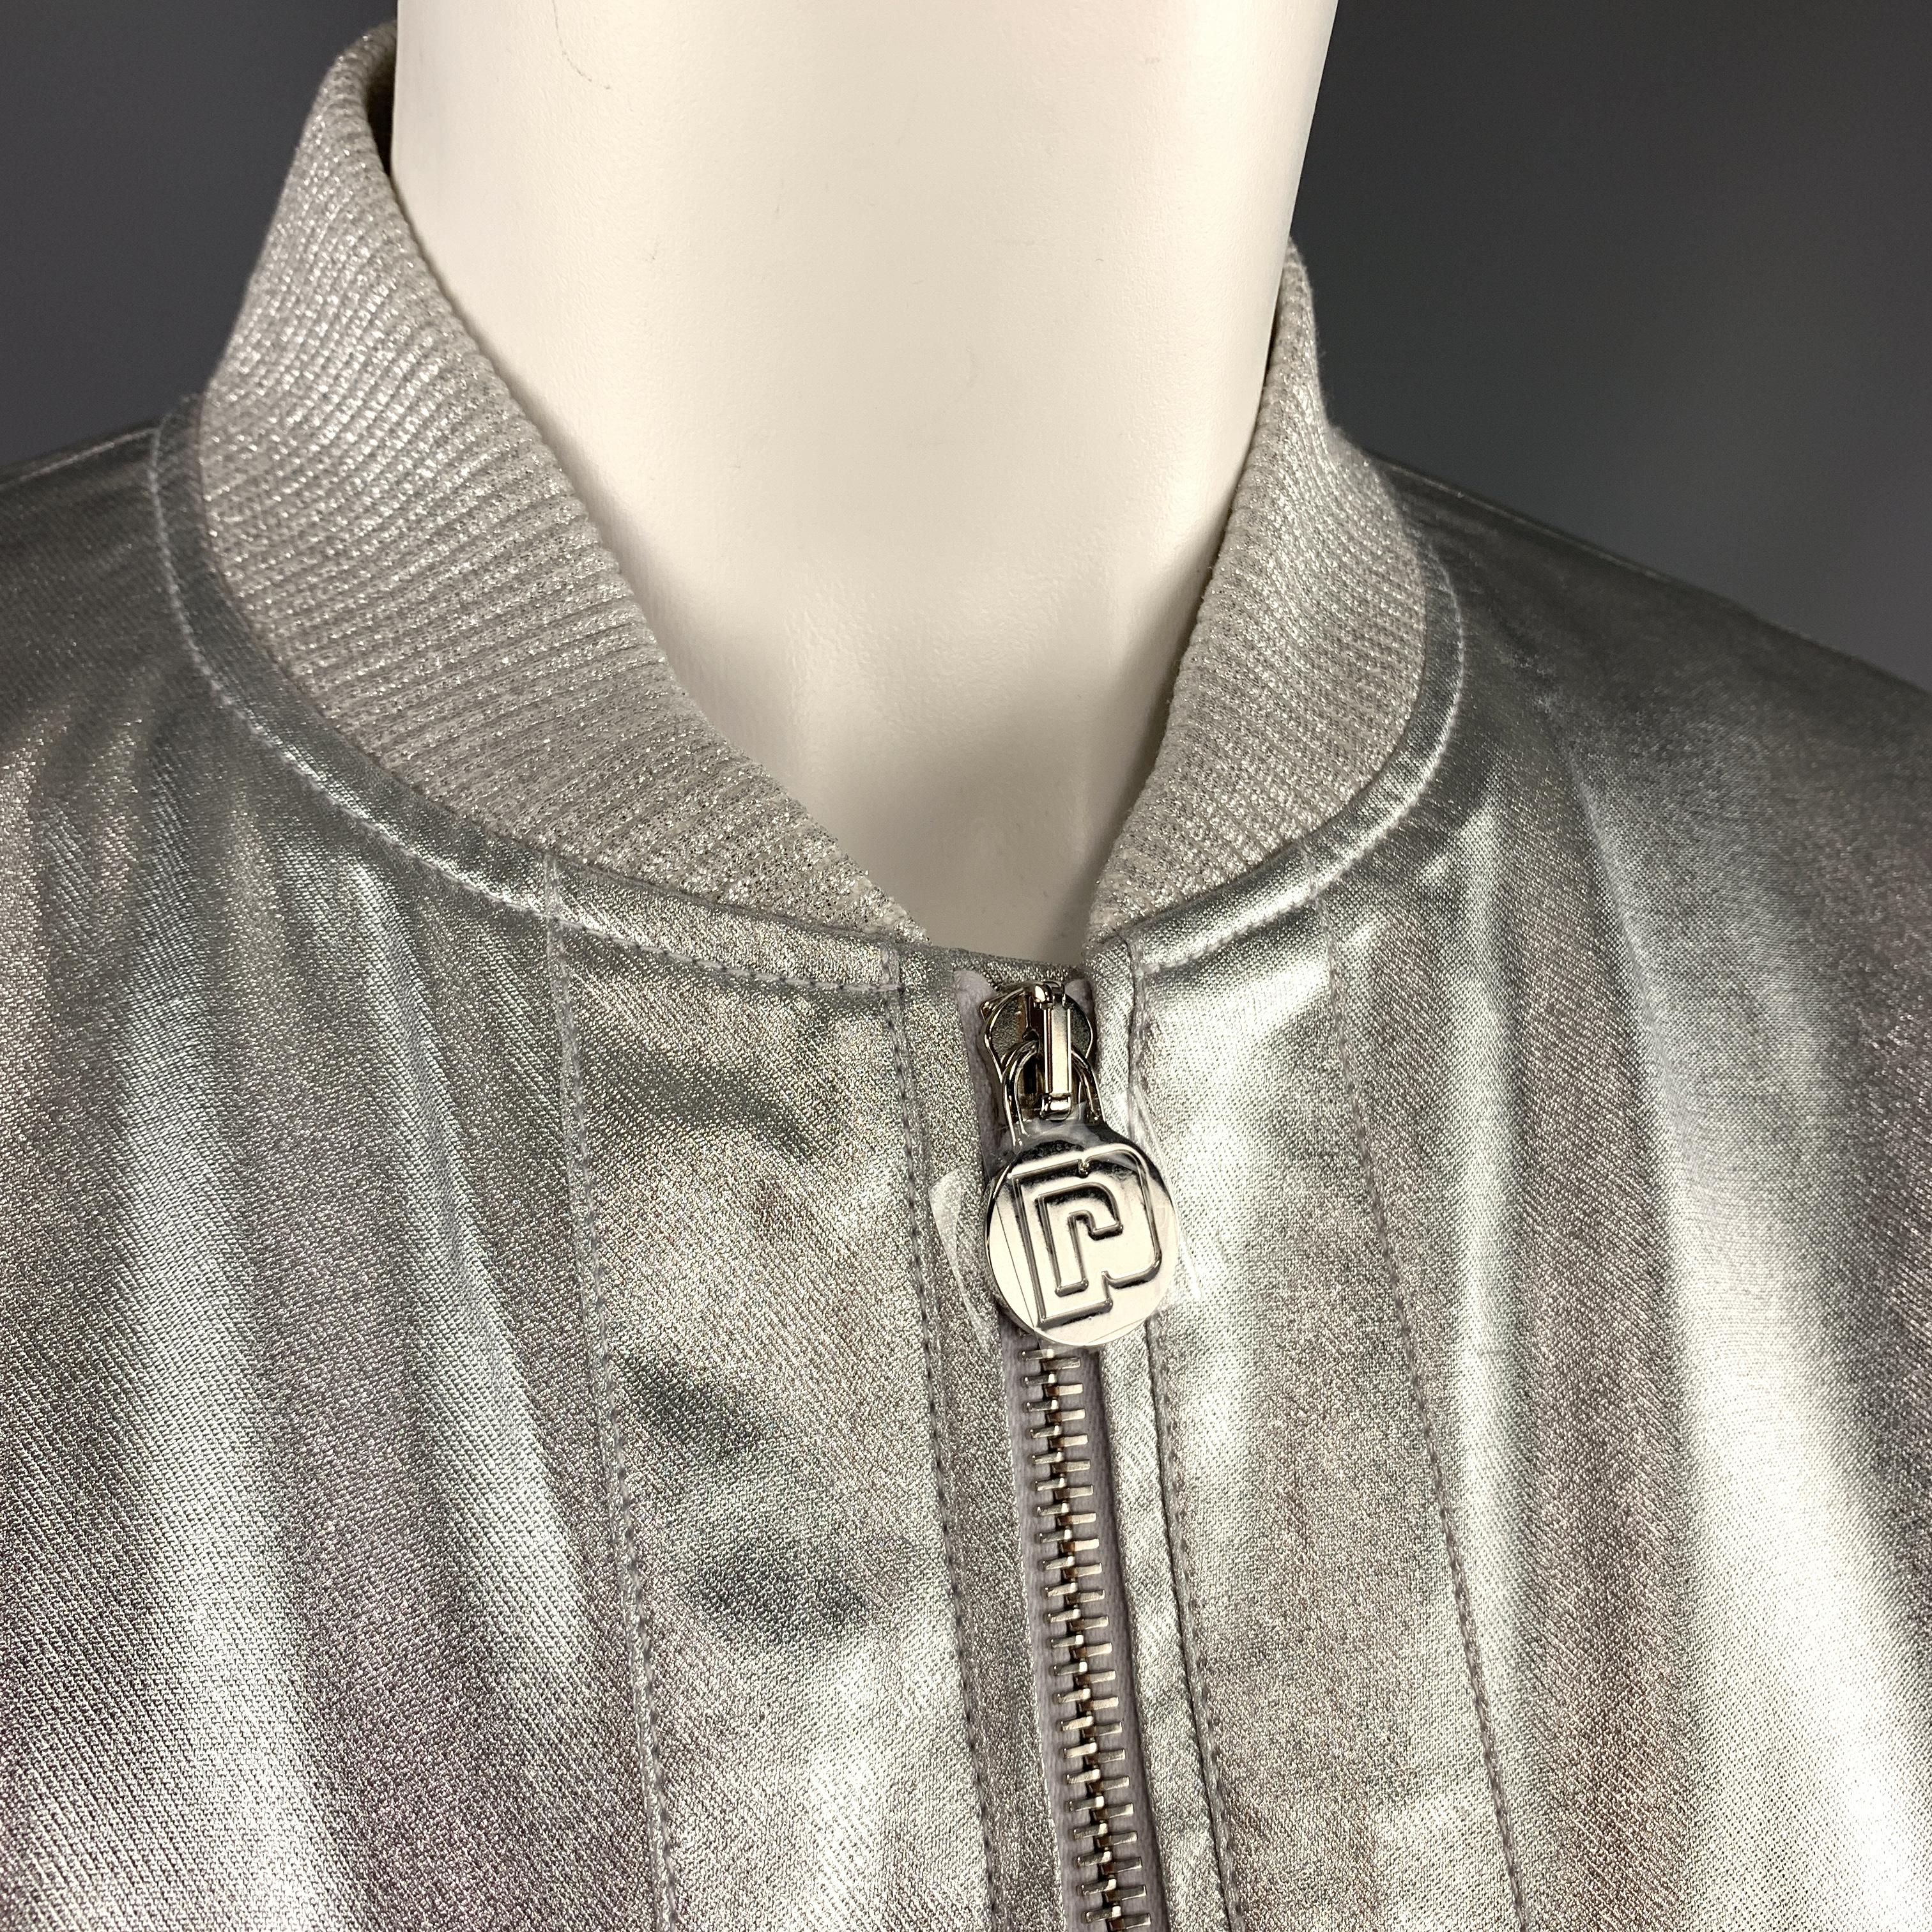 PACO ROBANNE light weight bomber jacket comes in metallic silver coated twill with a double zip front, slit pockets, ribbed sparkle knit baseball collar and cuffs, and elastic back gathered waistband. Made in Portugal.

New without Tags. Pre-Owned